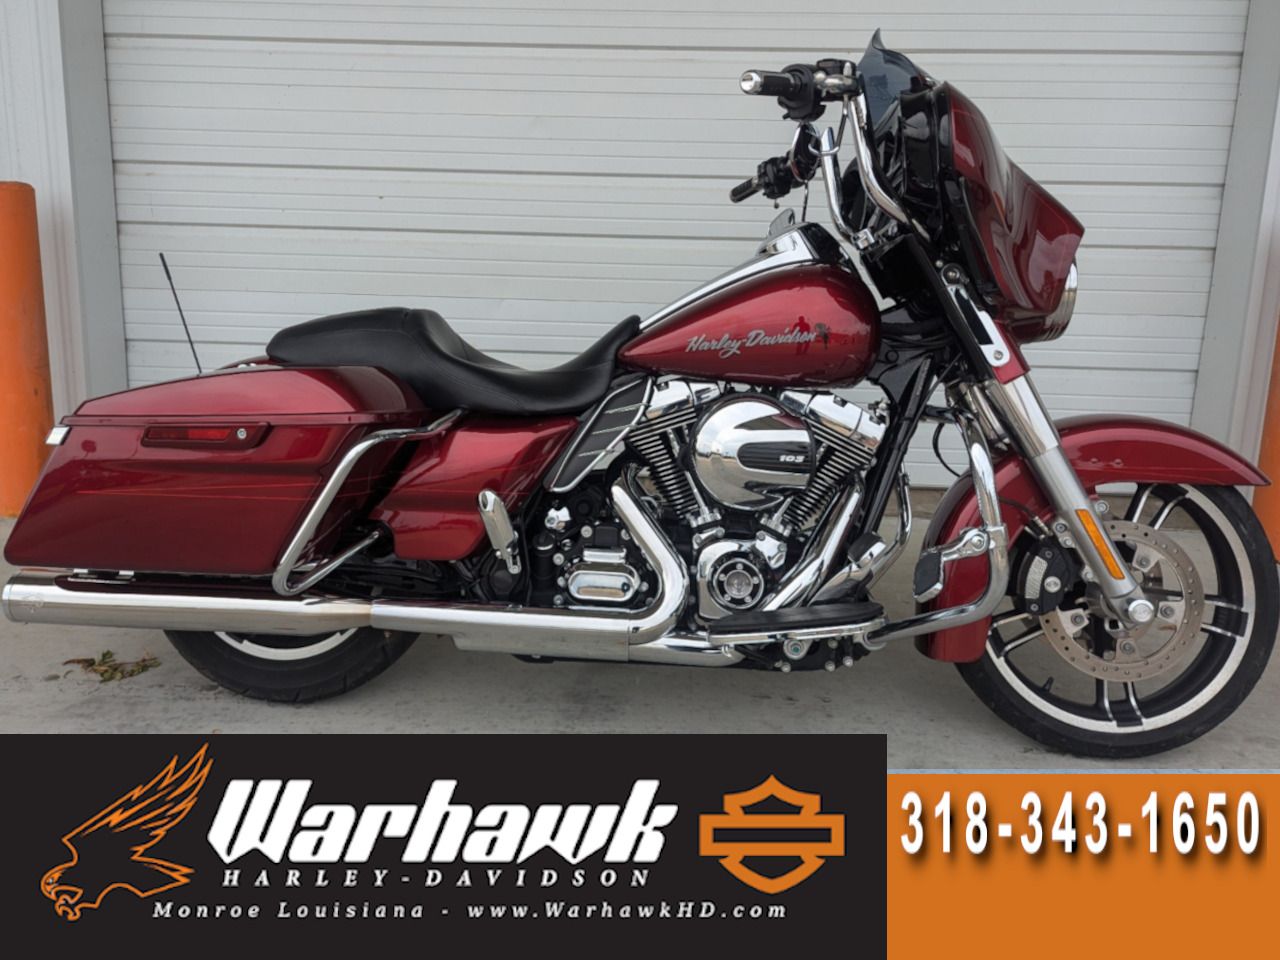 2016 harley davidson street glide special velocity red for sale near me - Photo 1